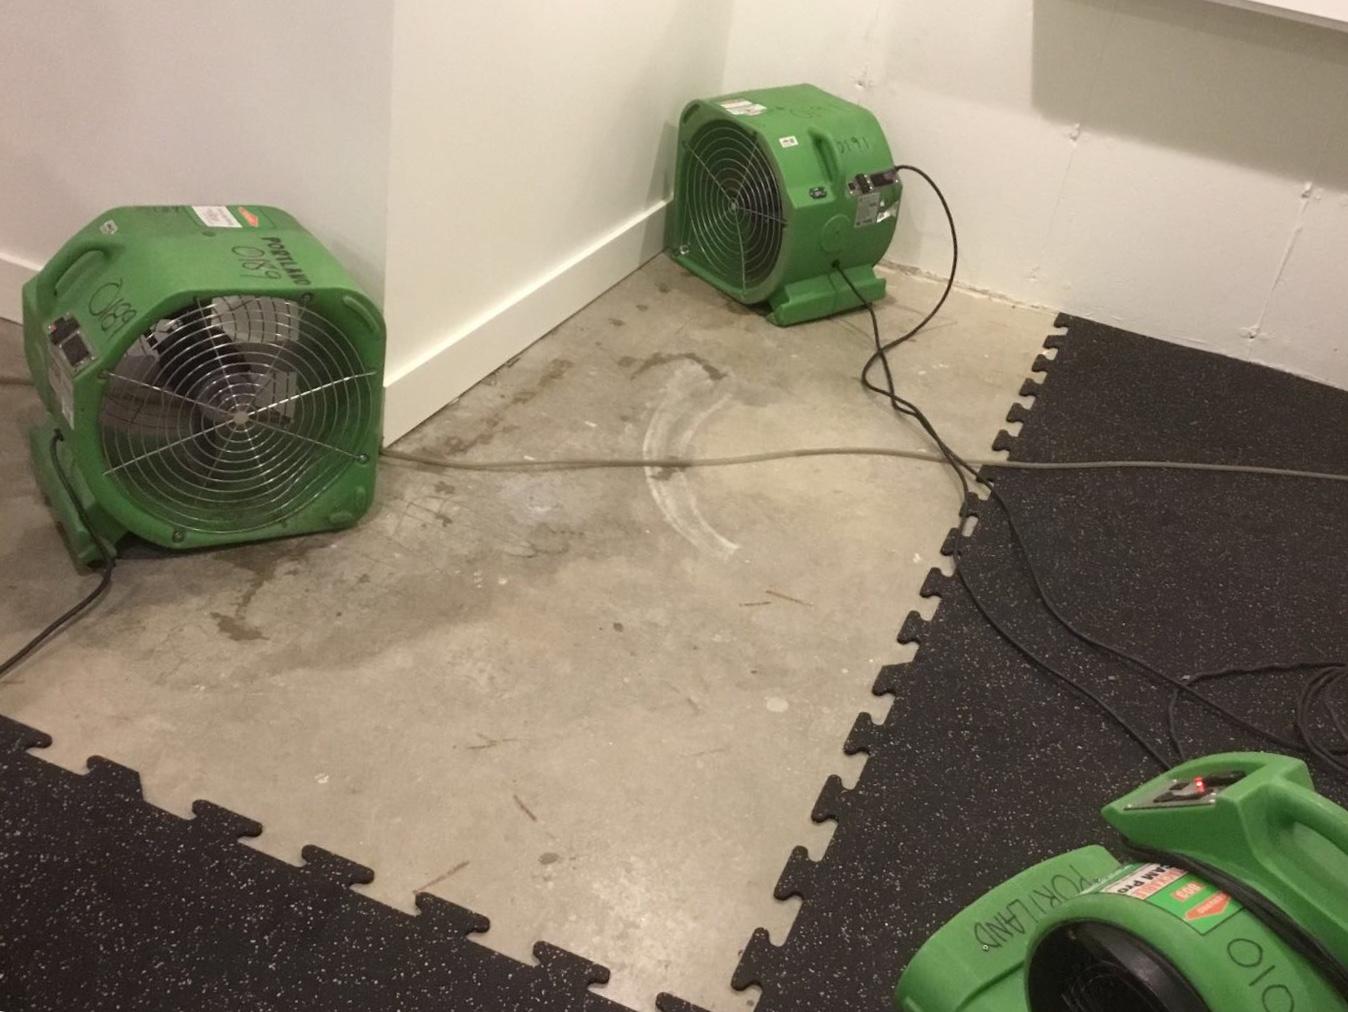 The SERVPRO equipment is up and running after a loss.